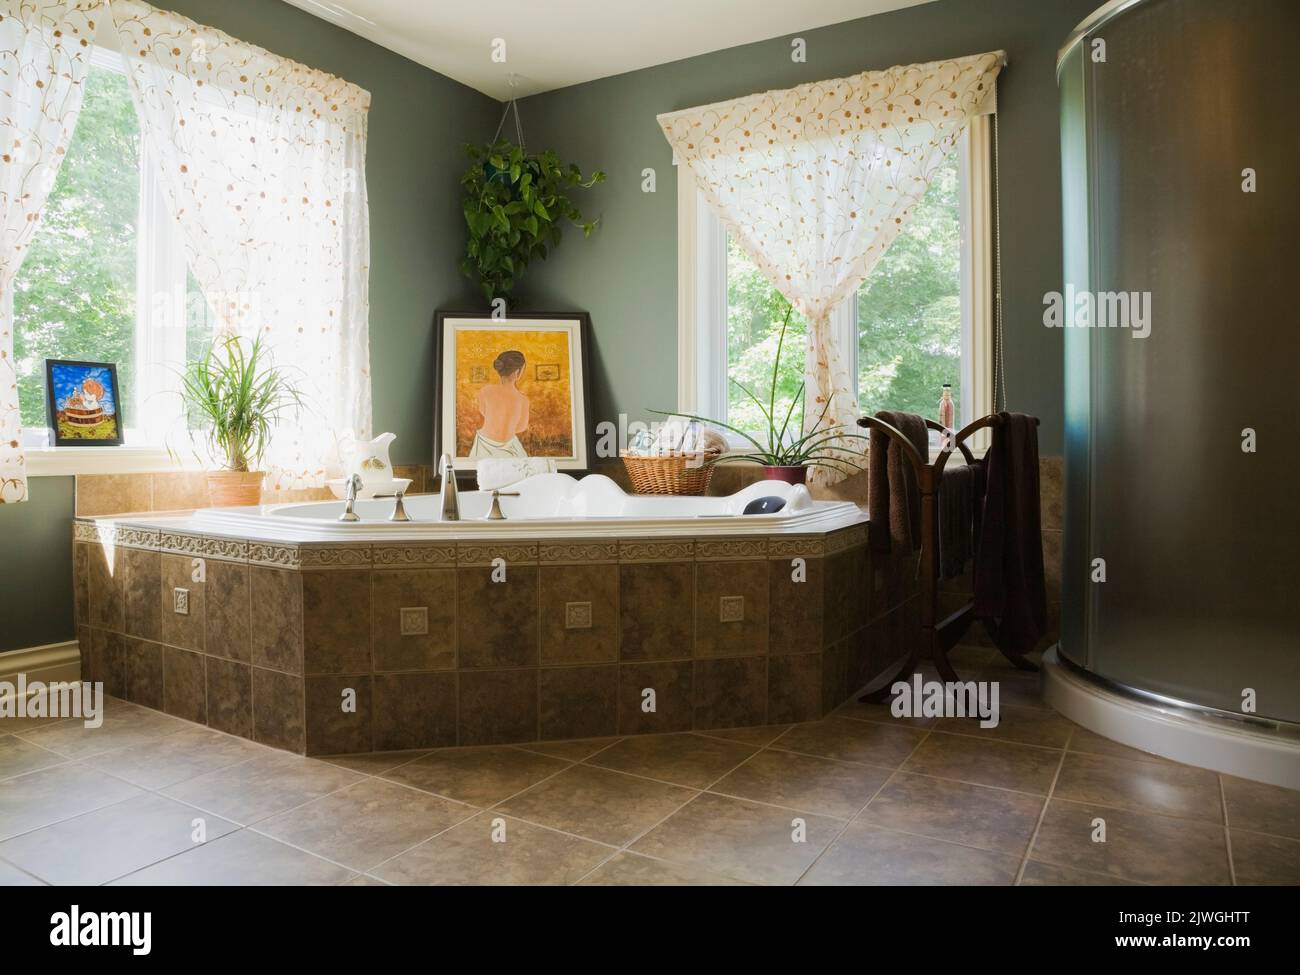 Main bathroom with whirlpool bathtub and glass shower stall inside cottage style home. Stock Photo